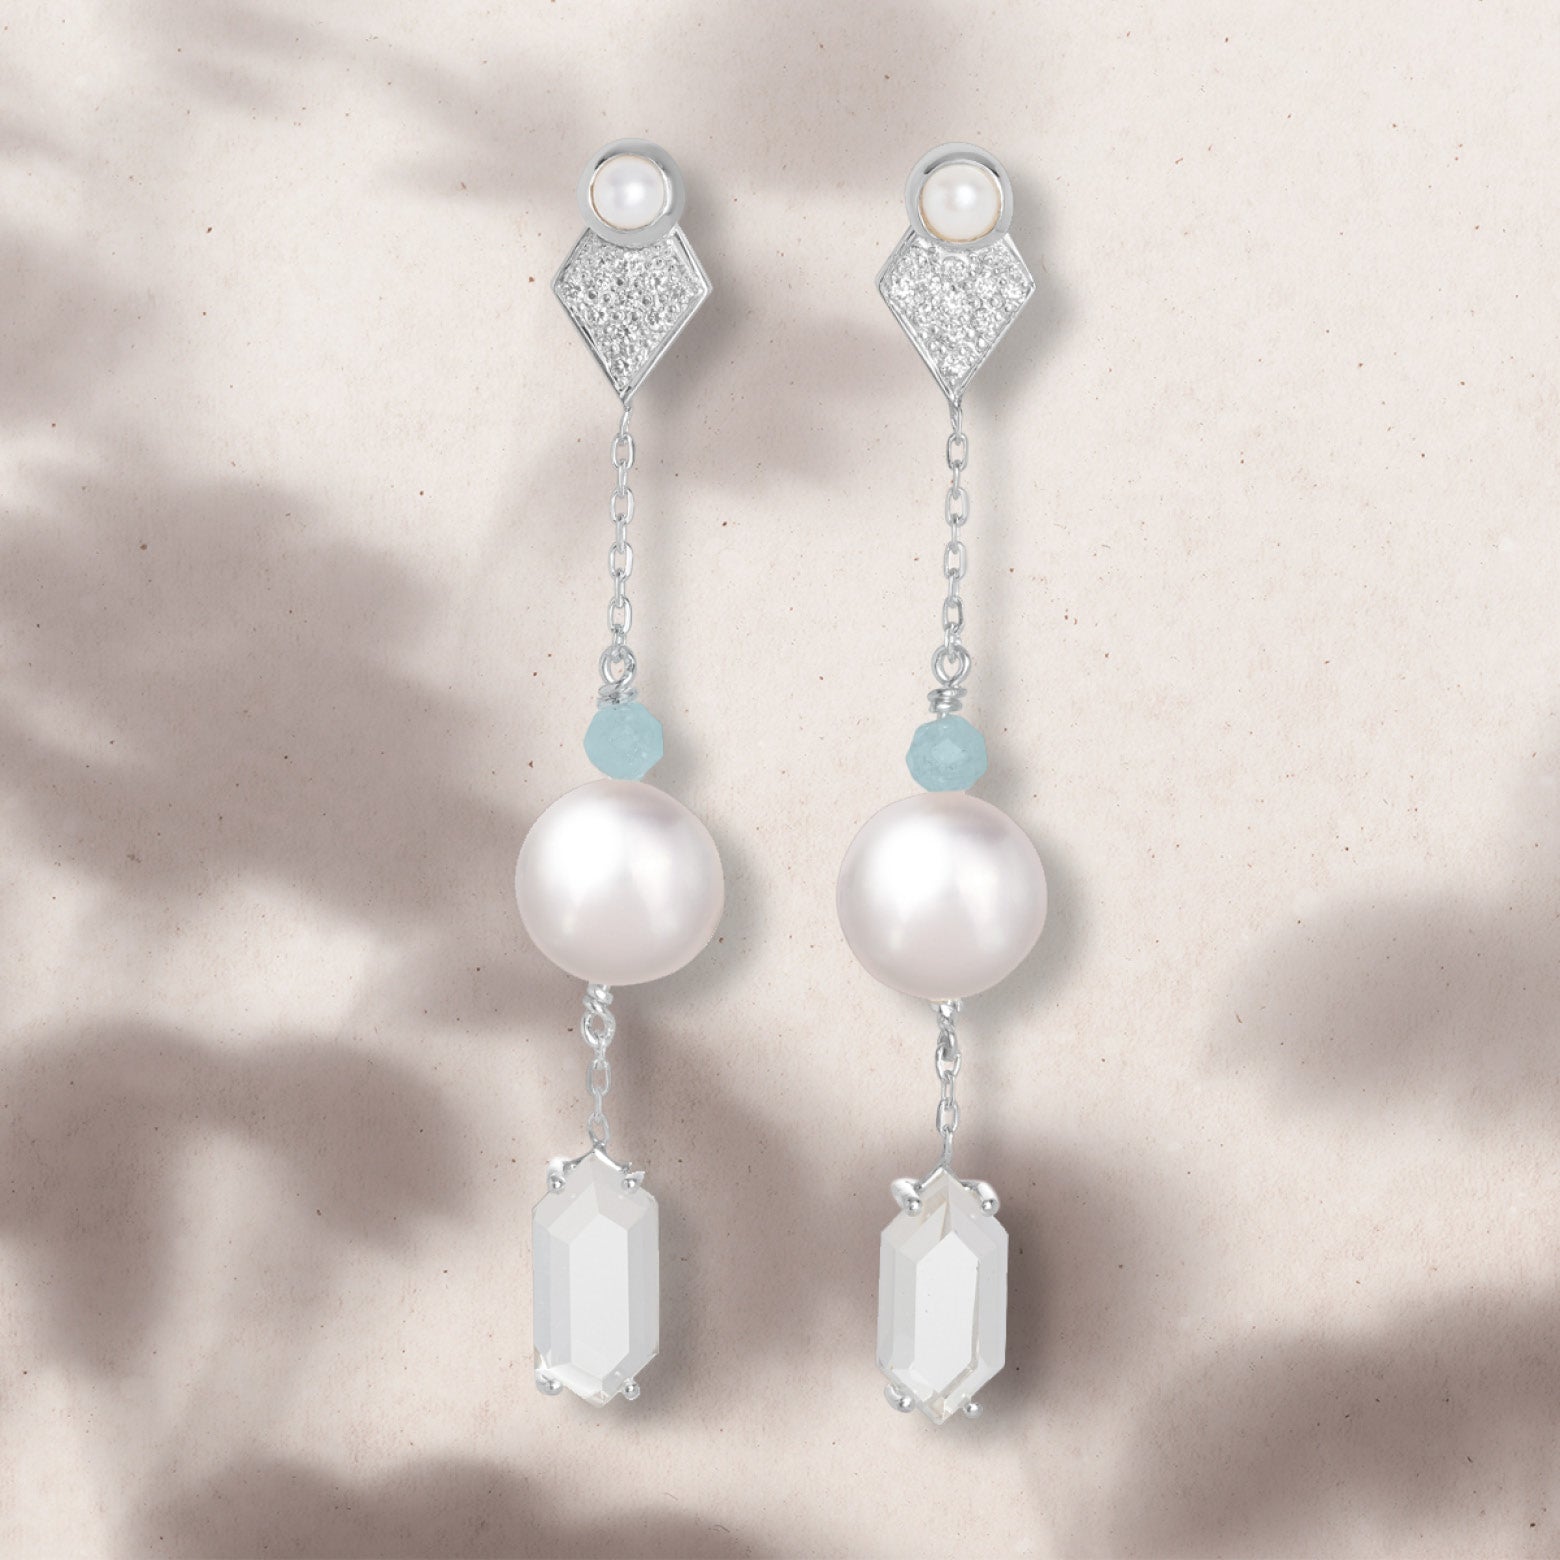 Flat lay of drop earrings featuring pearl, aquamarine, and clear quartz